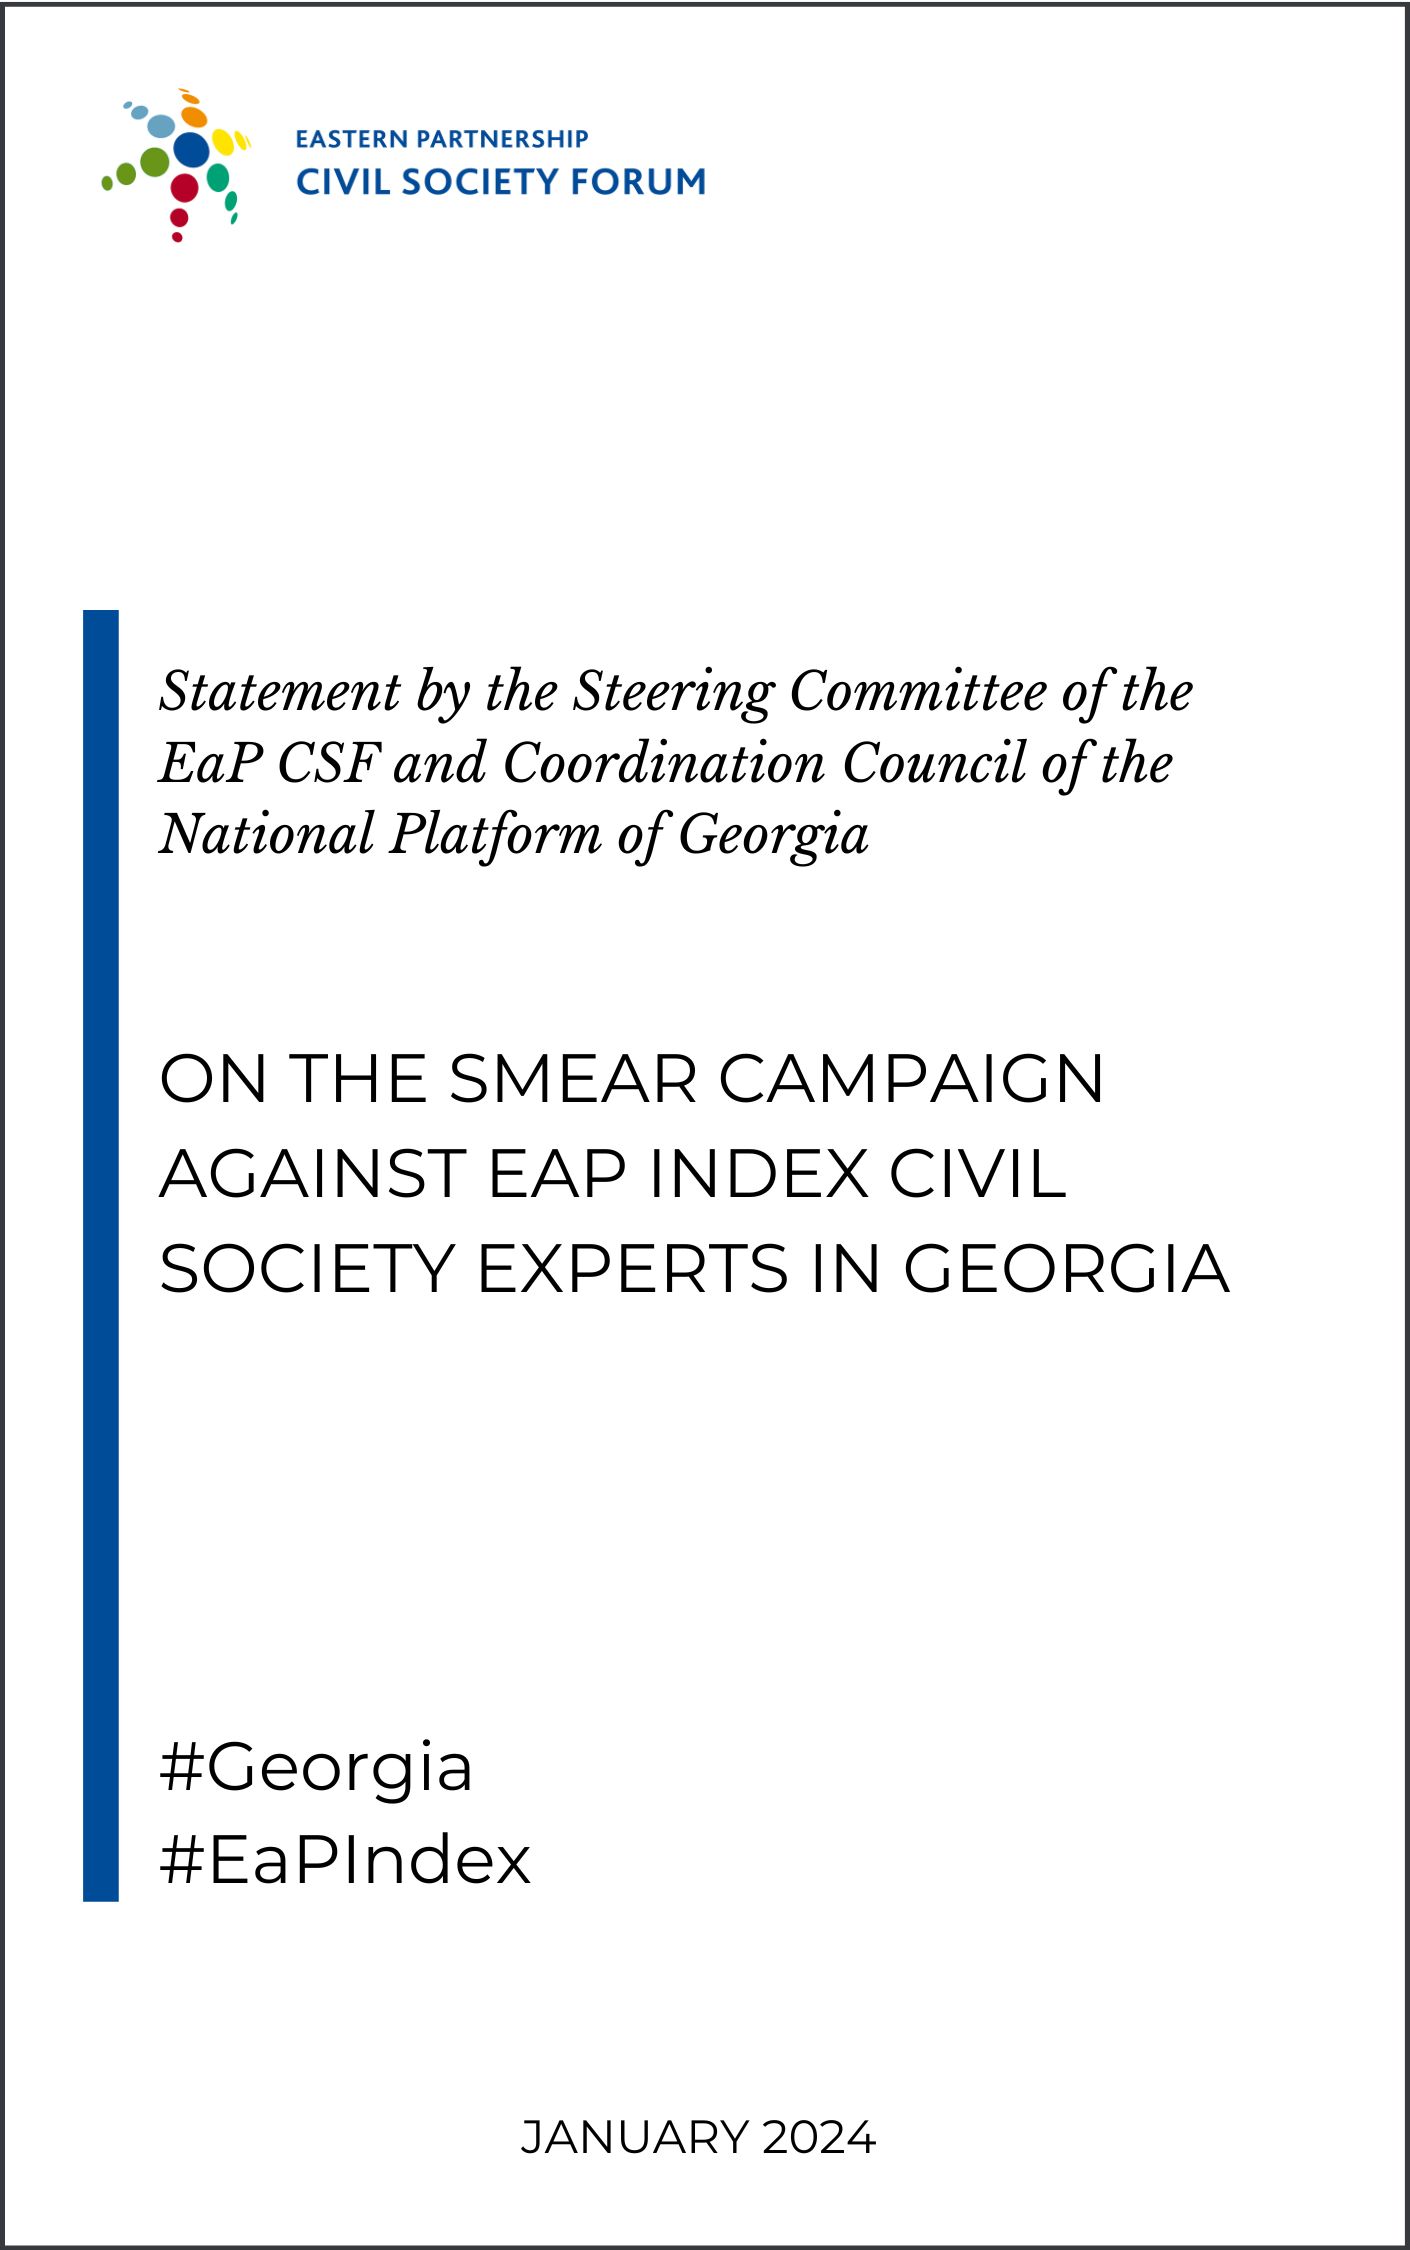 Statement by the Eastern Partnership Civil Society Forum (EaP CSF) Steering Committee and Coordination Council of the National Platform of Georgia on the smear campaign against EaP Index civil society experts in Georgia